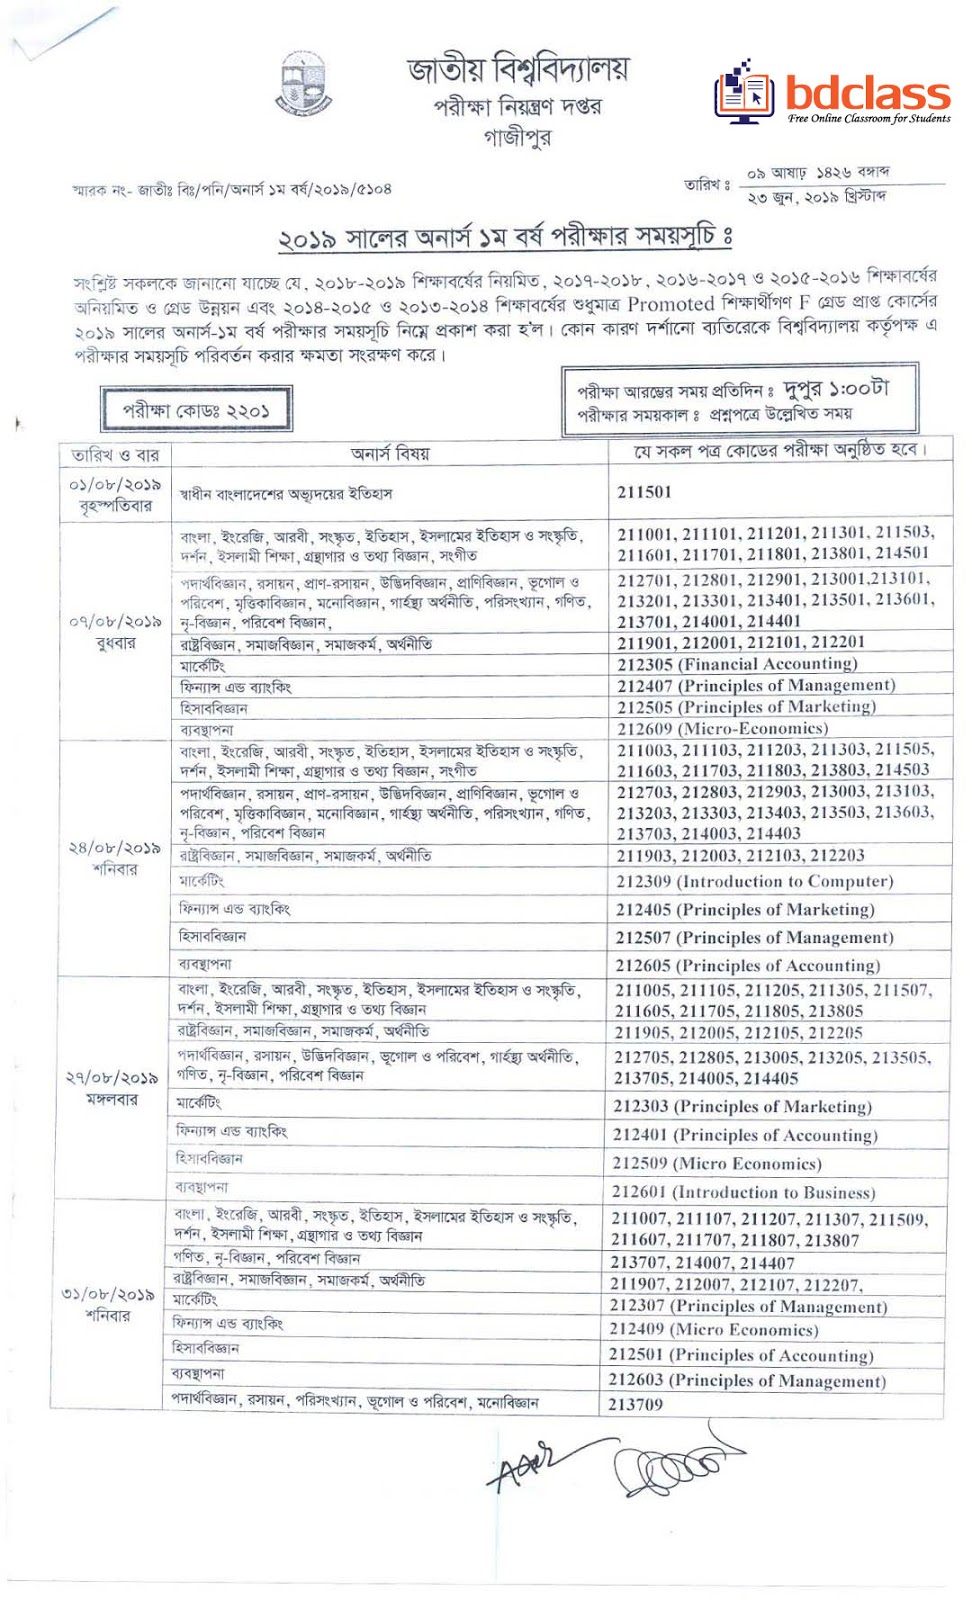 NU Honours 1st Year Exam Routine 2019